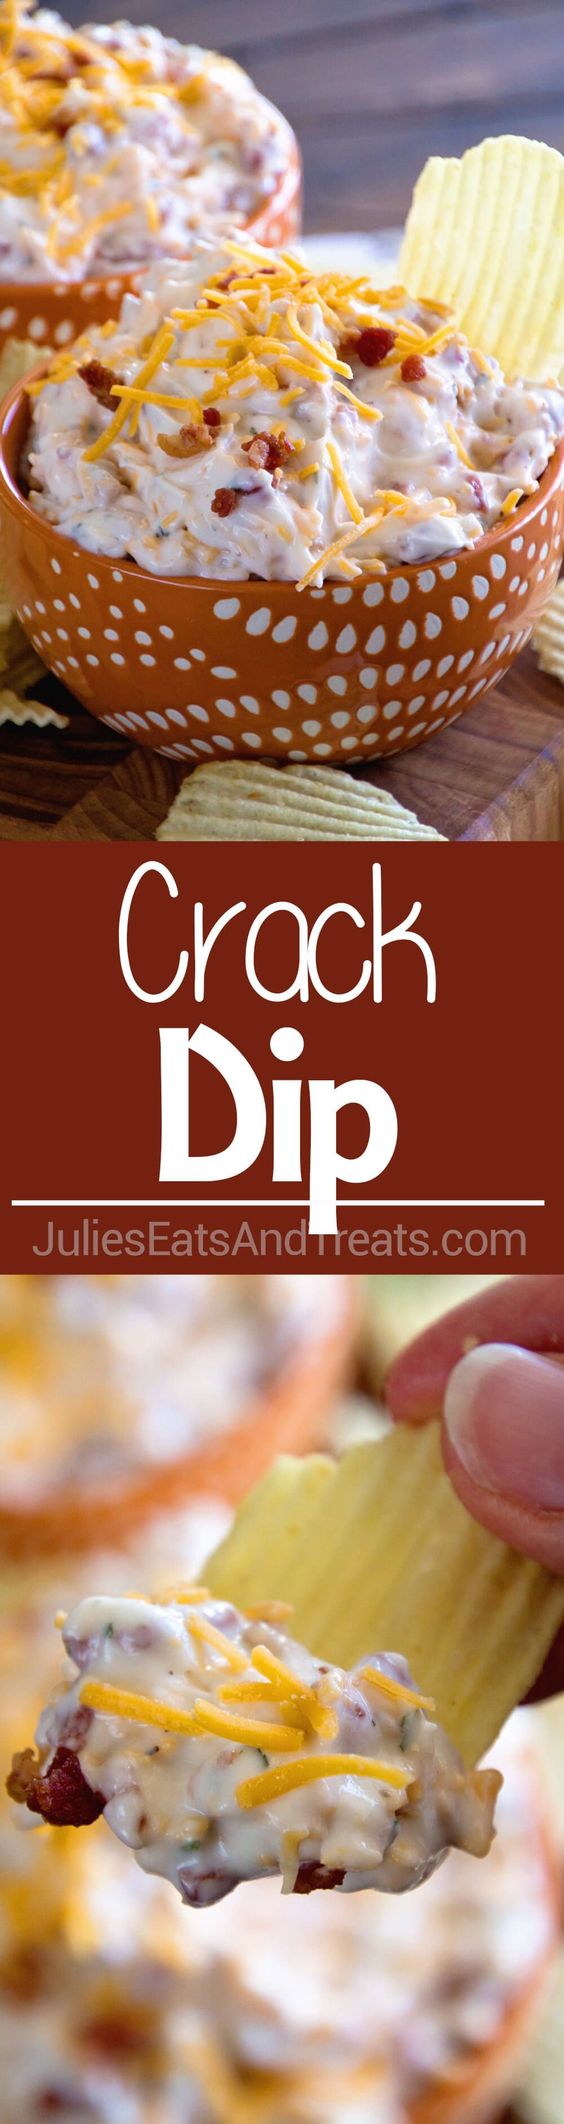 Crack Dip ~ Super Simple Chip Dip Loaded with Cheese, Bacon, Ranch and Sour Cream! via @julieseats